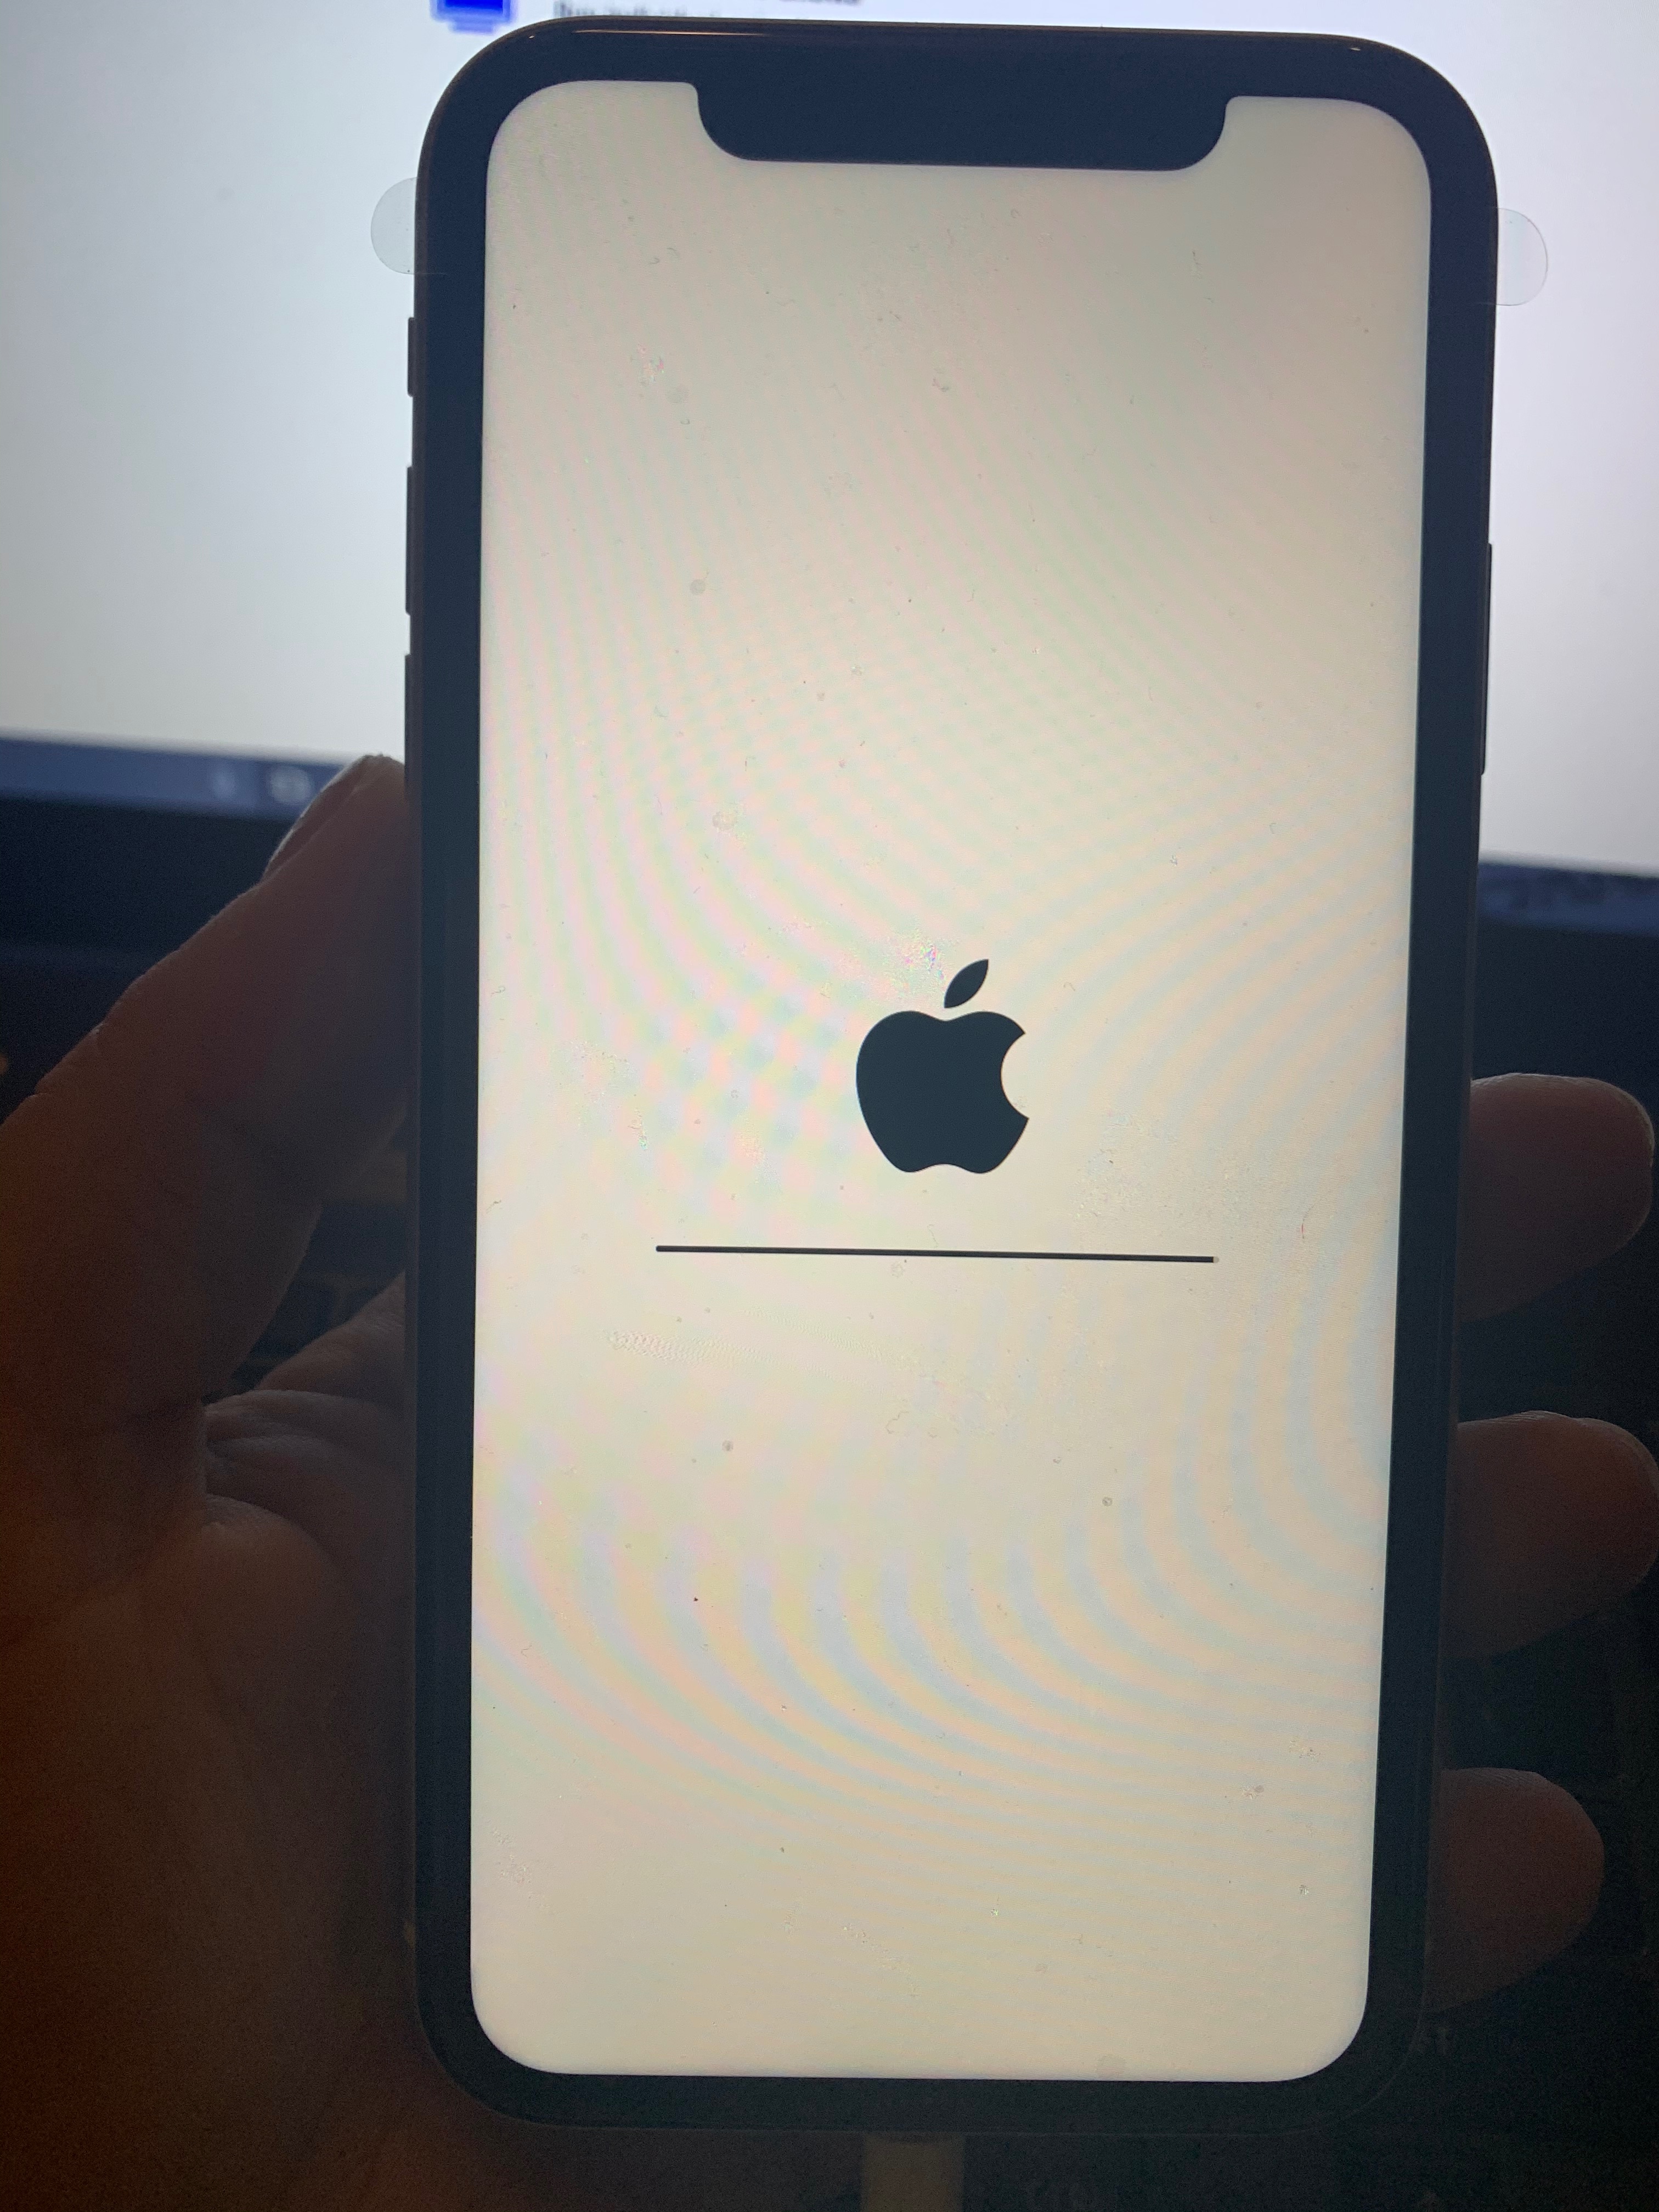 iphone 6 stuck on itunes connect screen